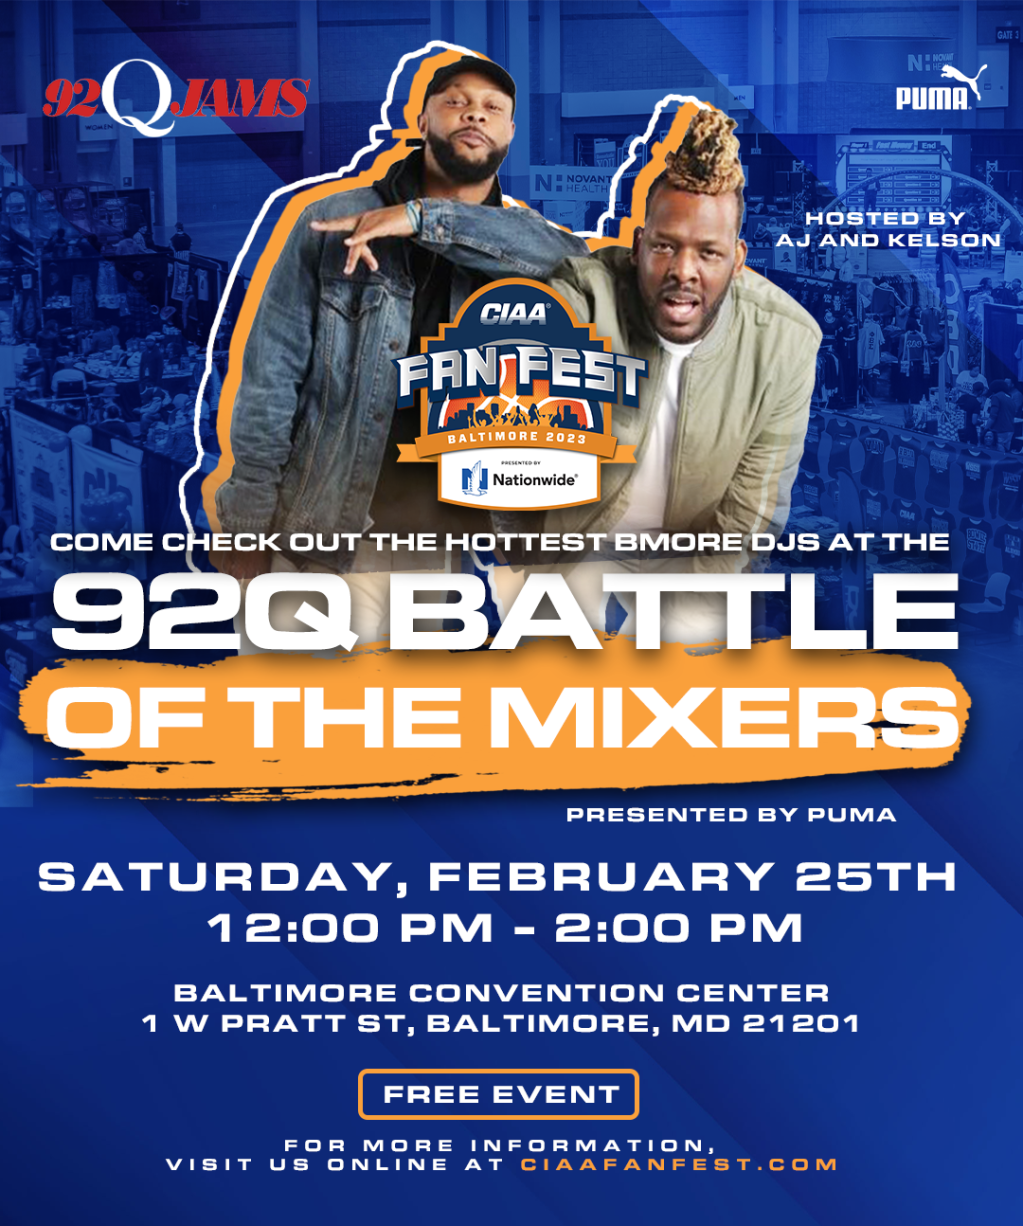 CIAA Battle of the Mixers Contest - Presented By PUMA